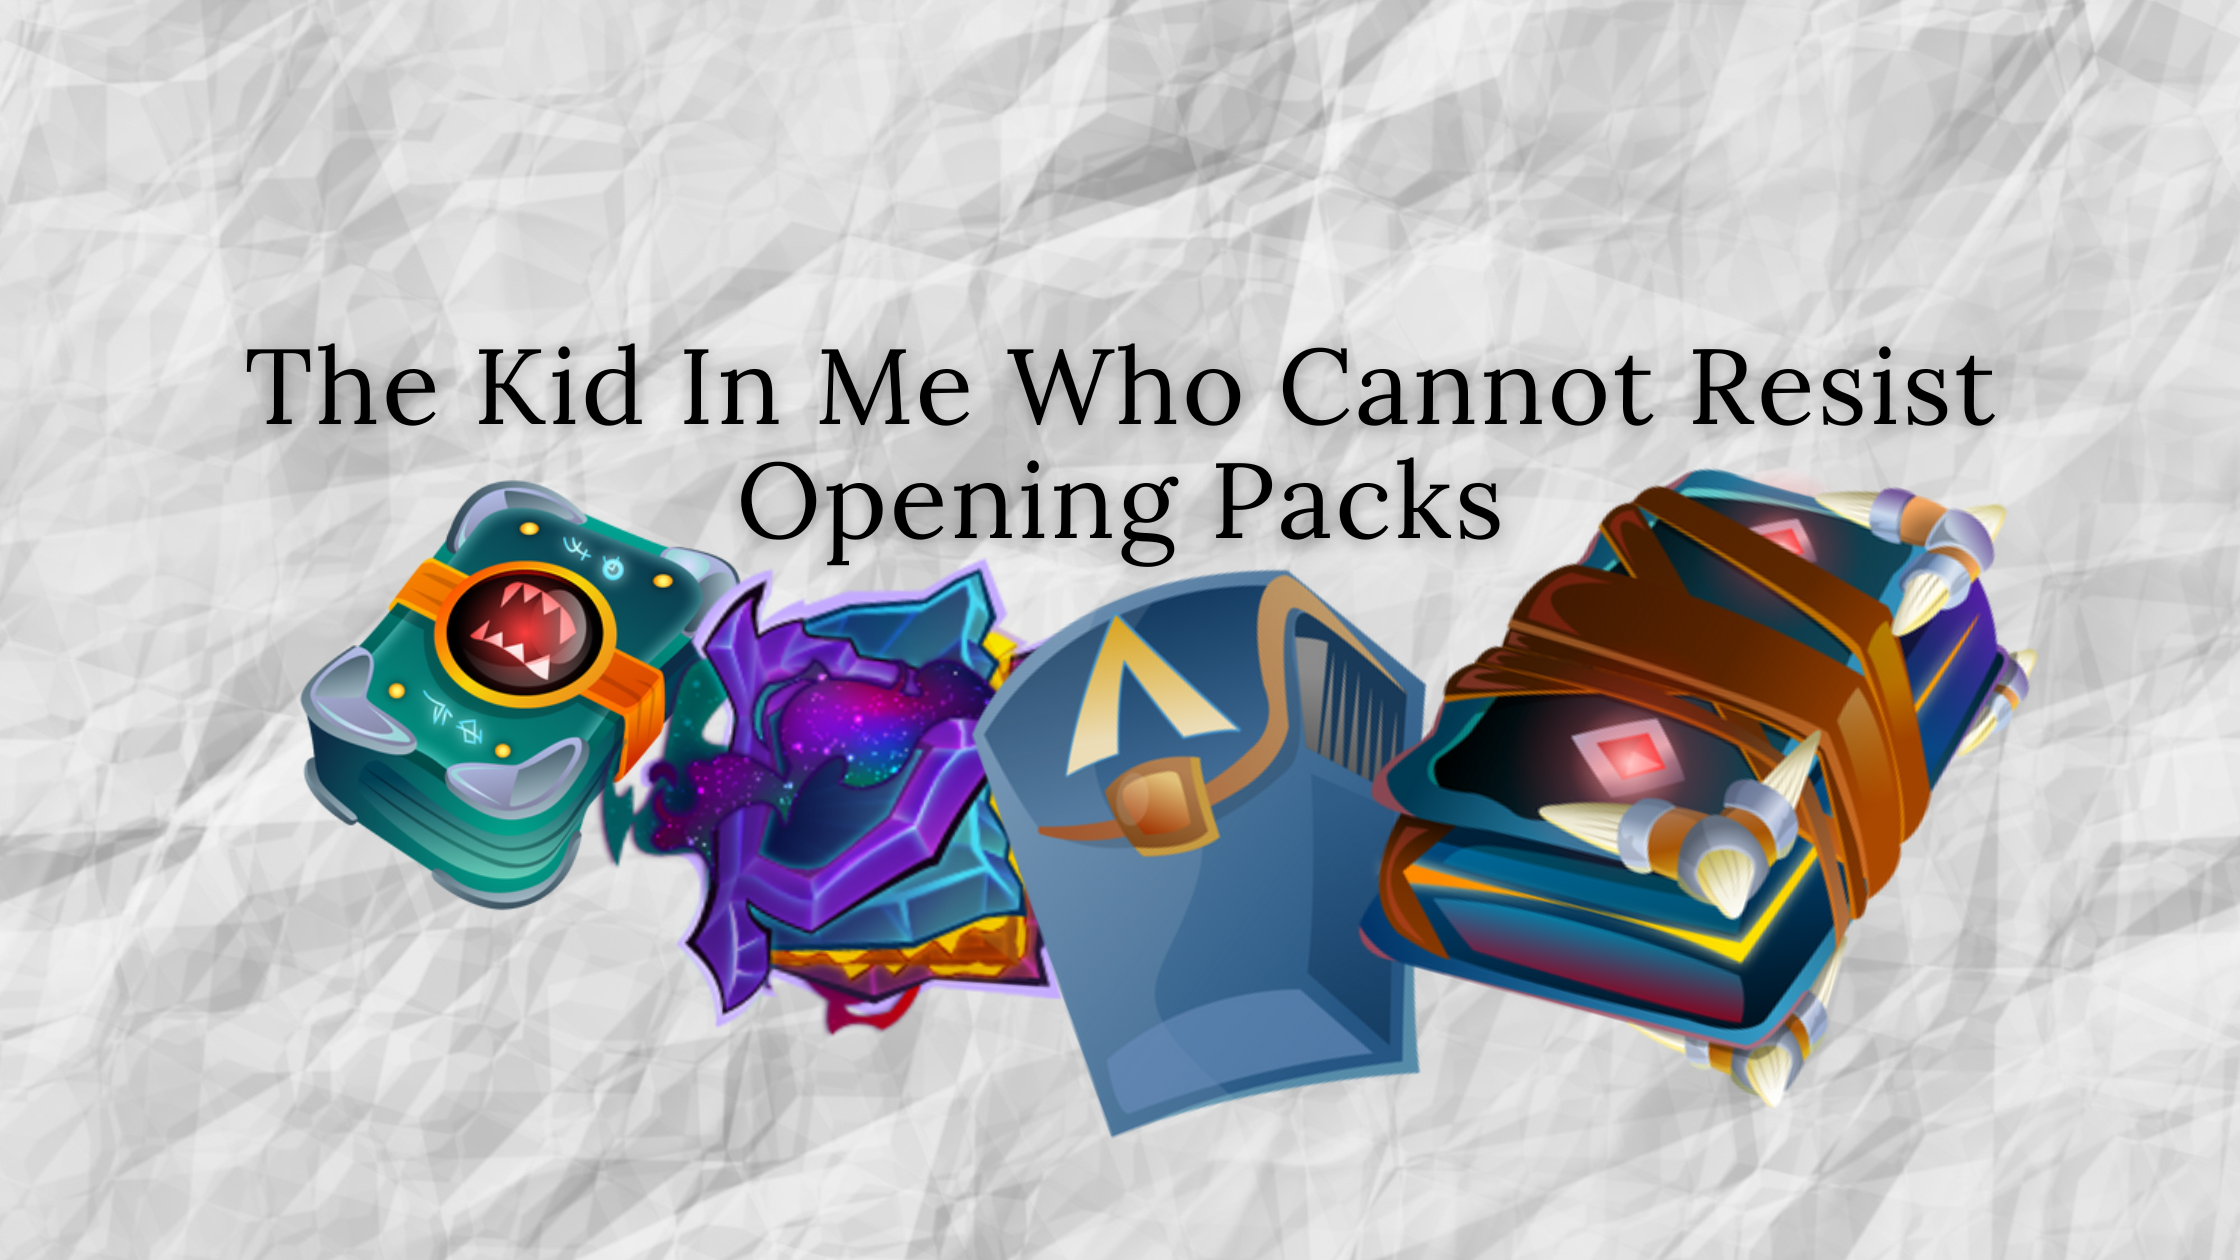 The Kid In Me Who Cannot Resist Opening Packs (1).png